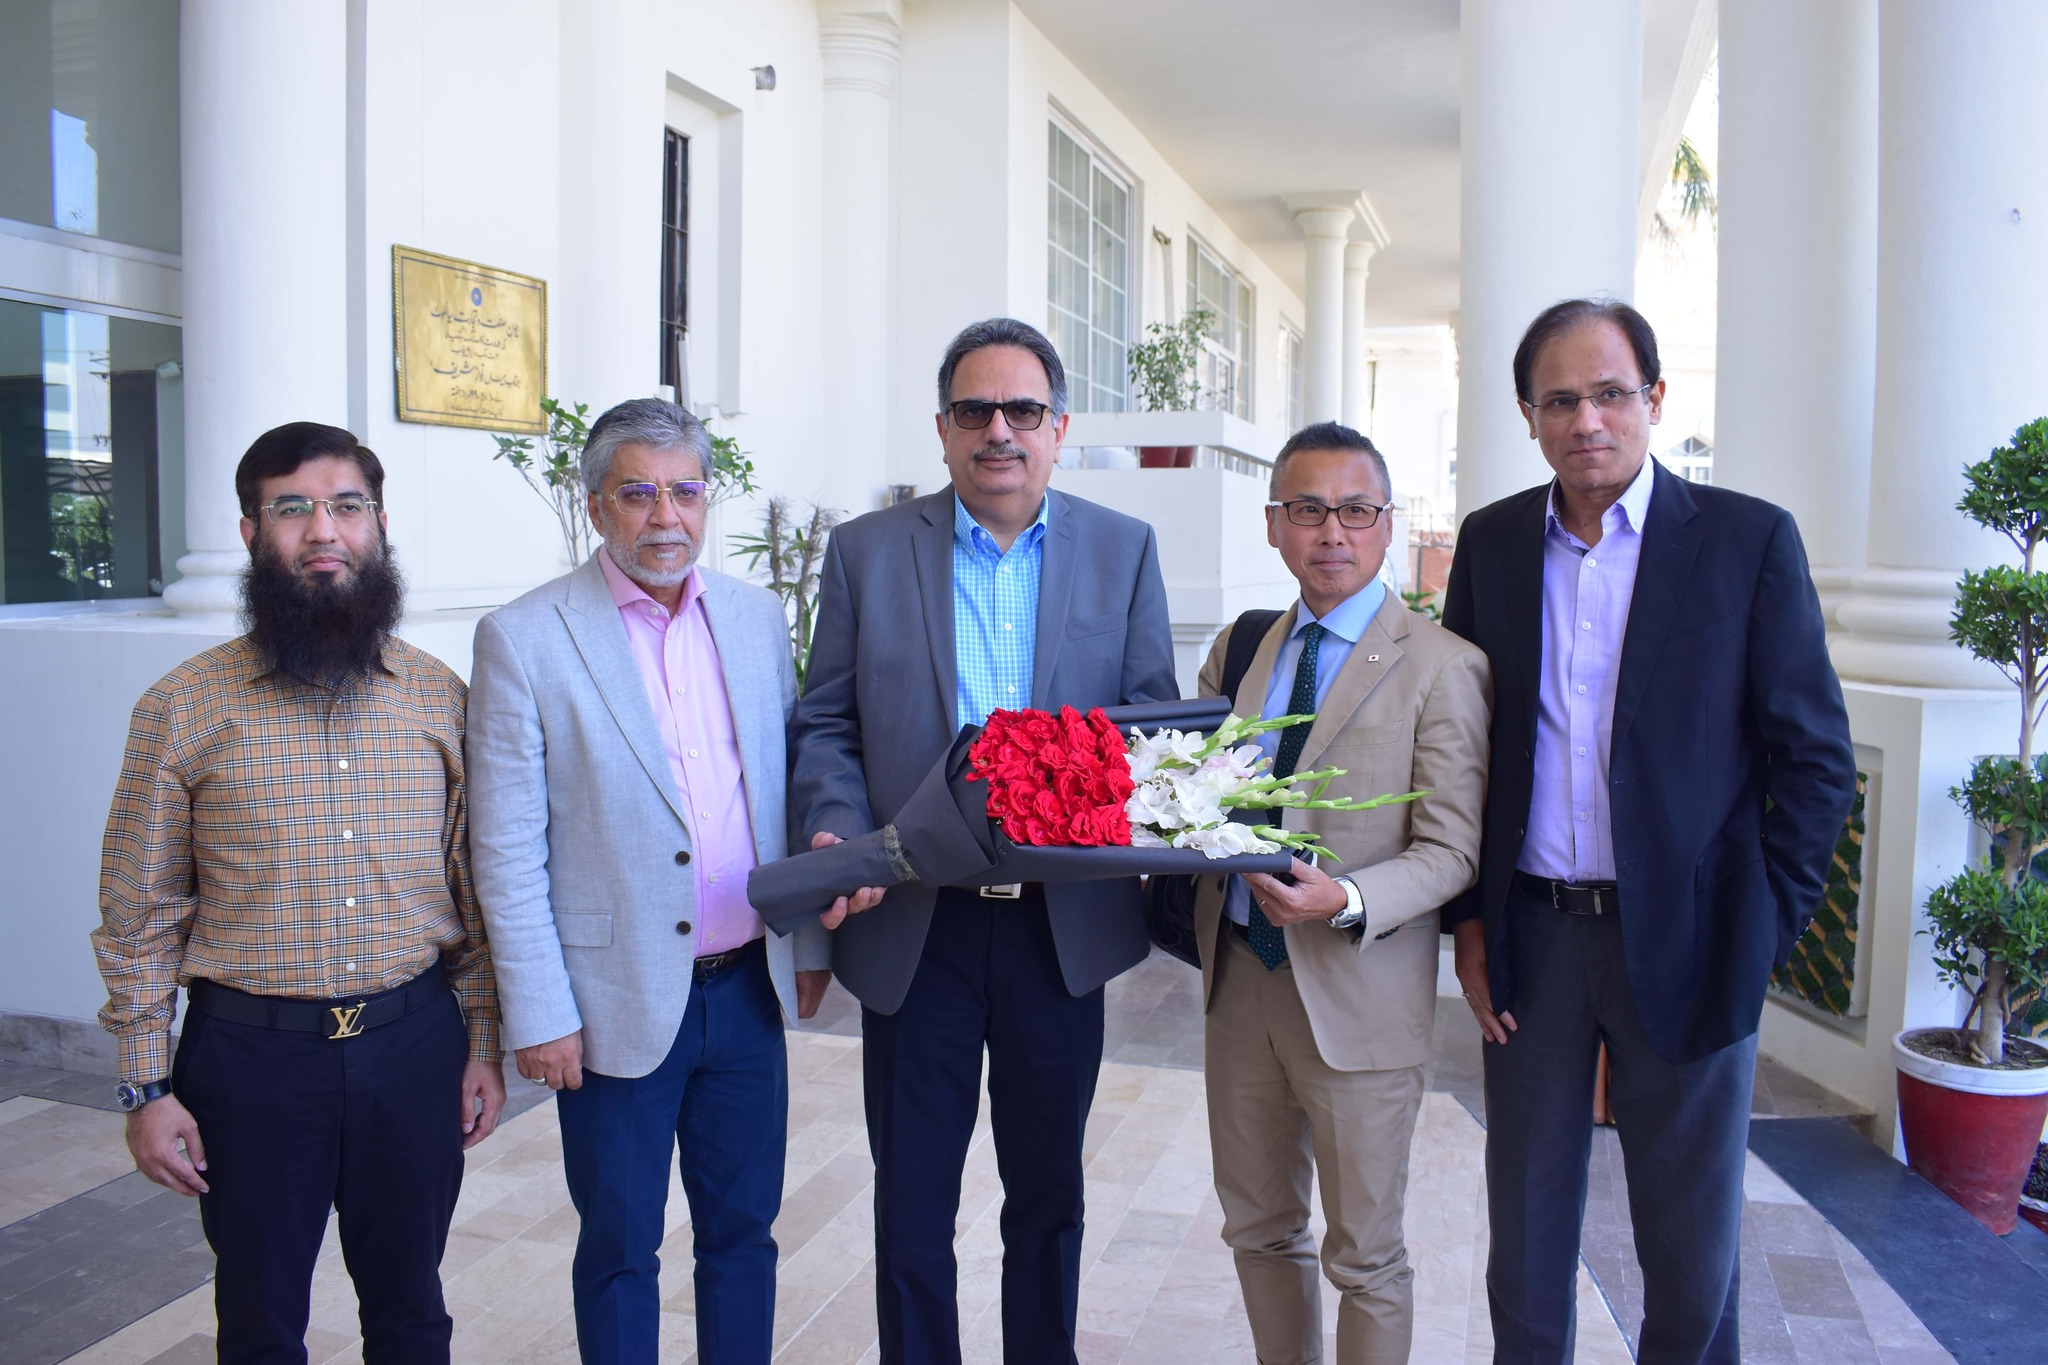 On May 9, 2023, the Country Director of JETRO Mr. Yamaguchi Kazunori visited SCCI to meet  Mr. Abdul Ghafoor Malik, President, and Mr. Amer Majeed Sheikh Vice President.